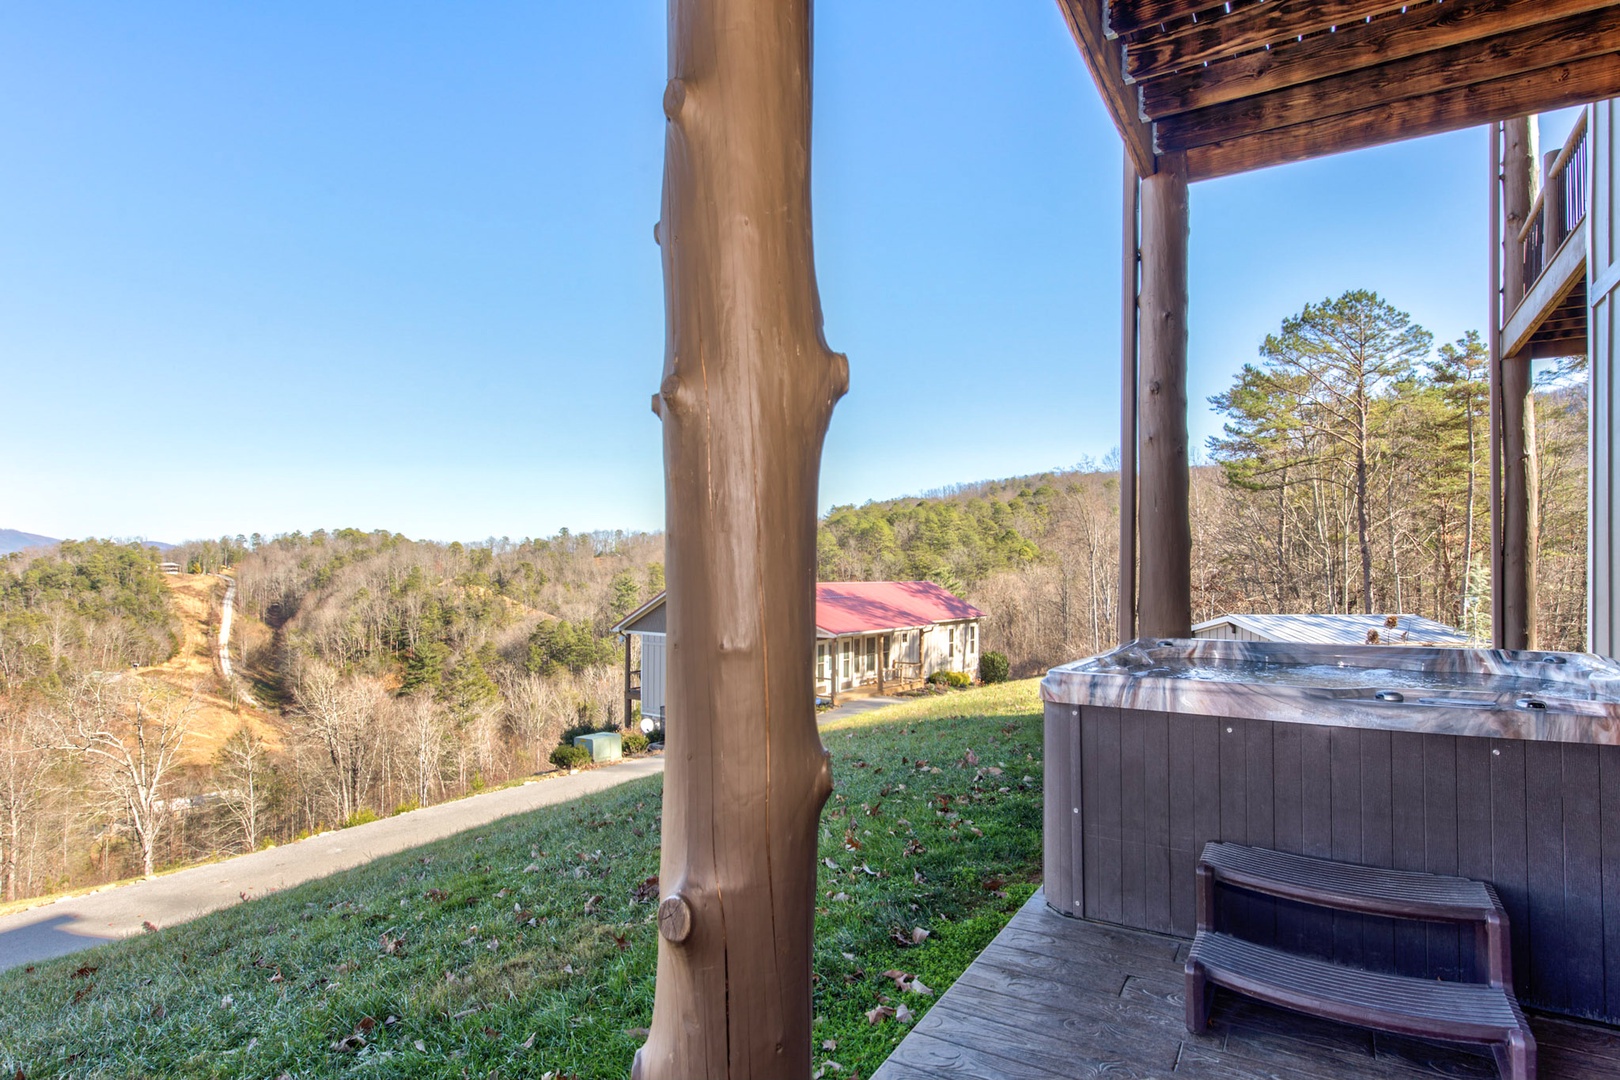 Relax and unwind in your private hot tub with a stunning view